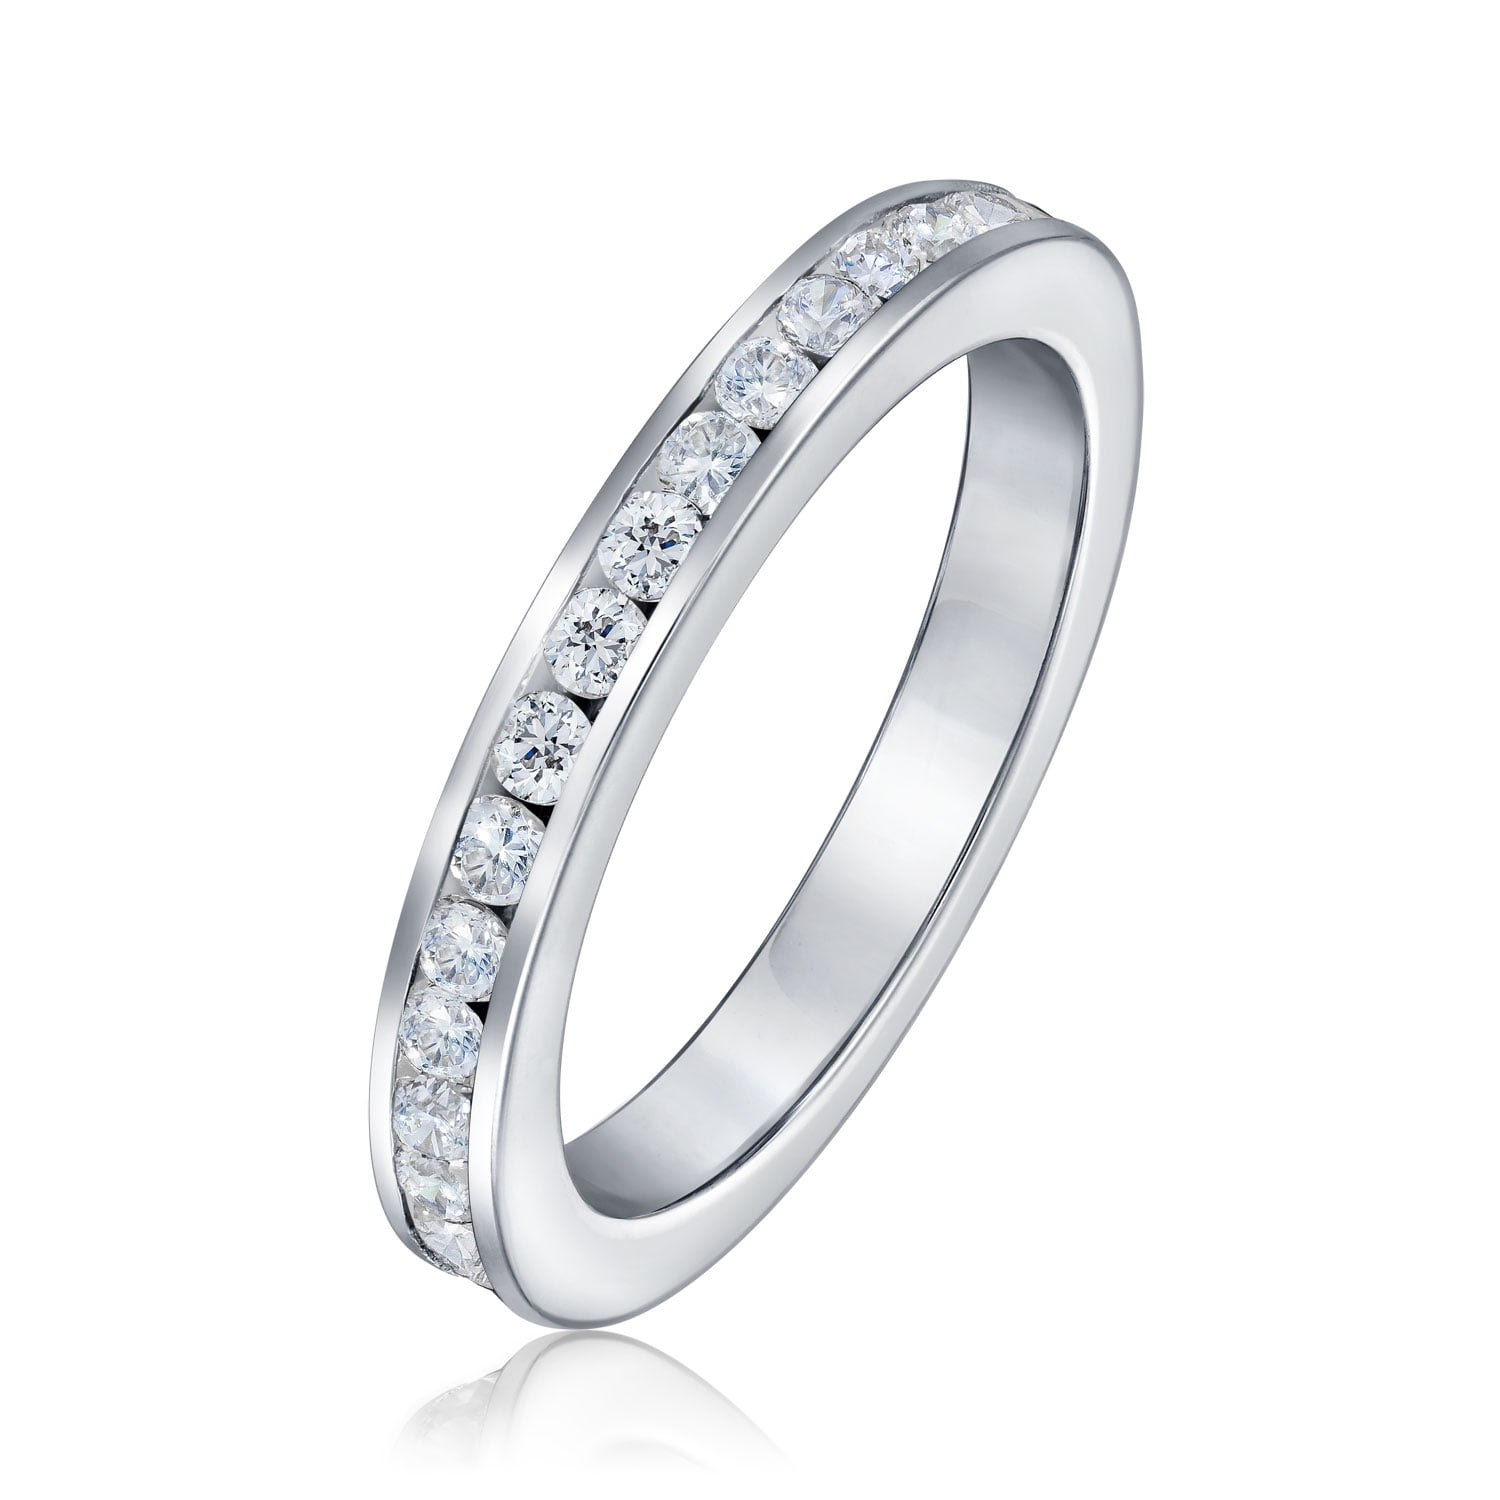 STERLING SILVER .925 4 MM STACKABLE ETERNITY CZ RING 